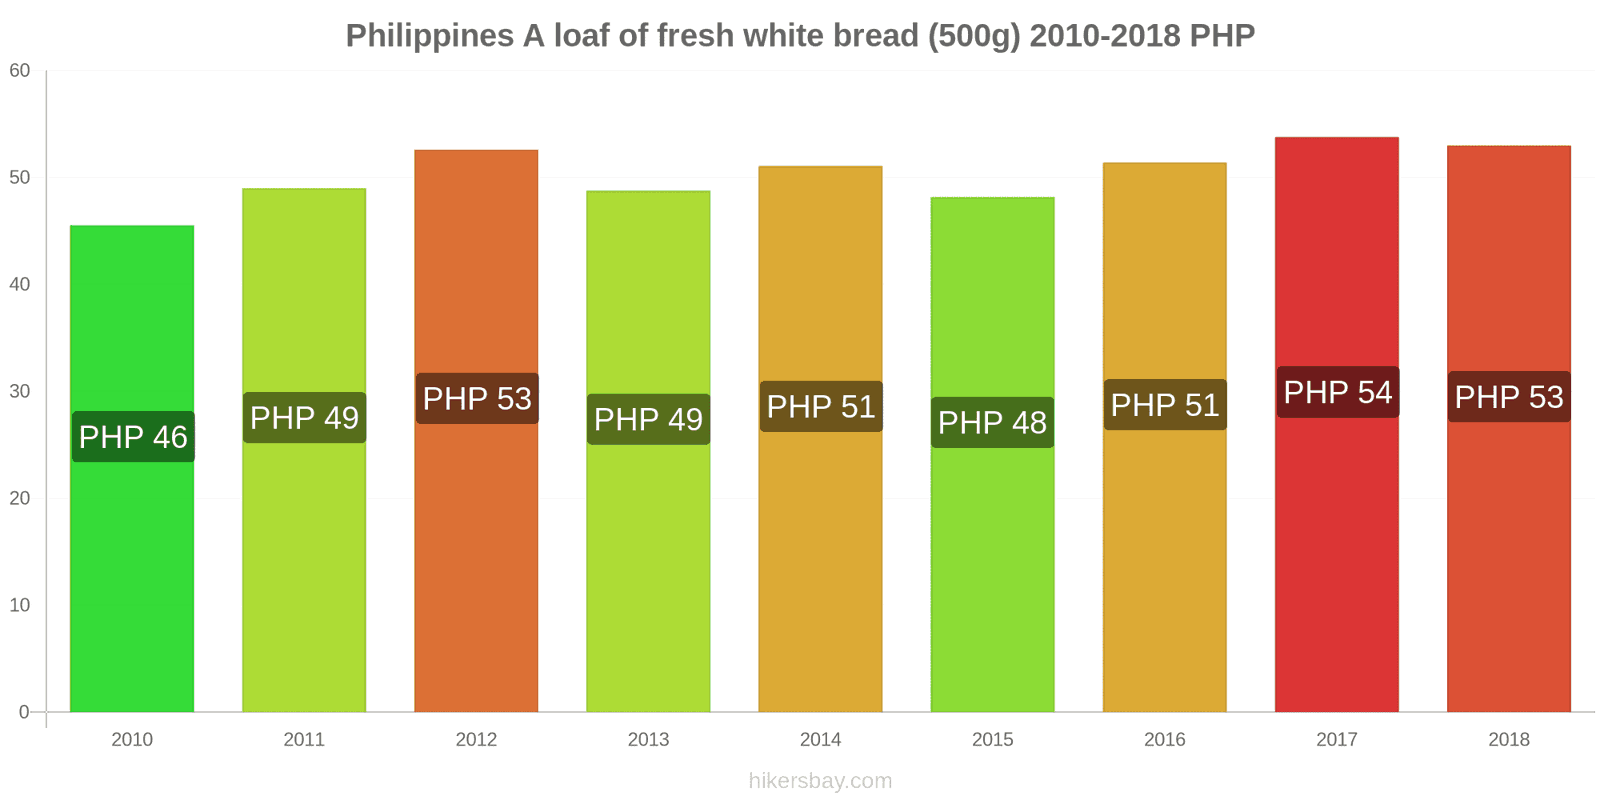 Philippines price changes A loaf of fresh white bread (500g) hikersbay.com